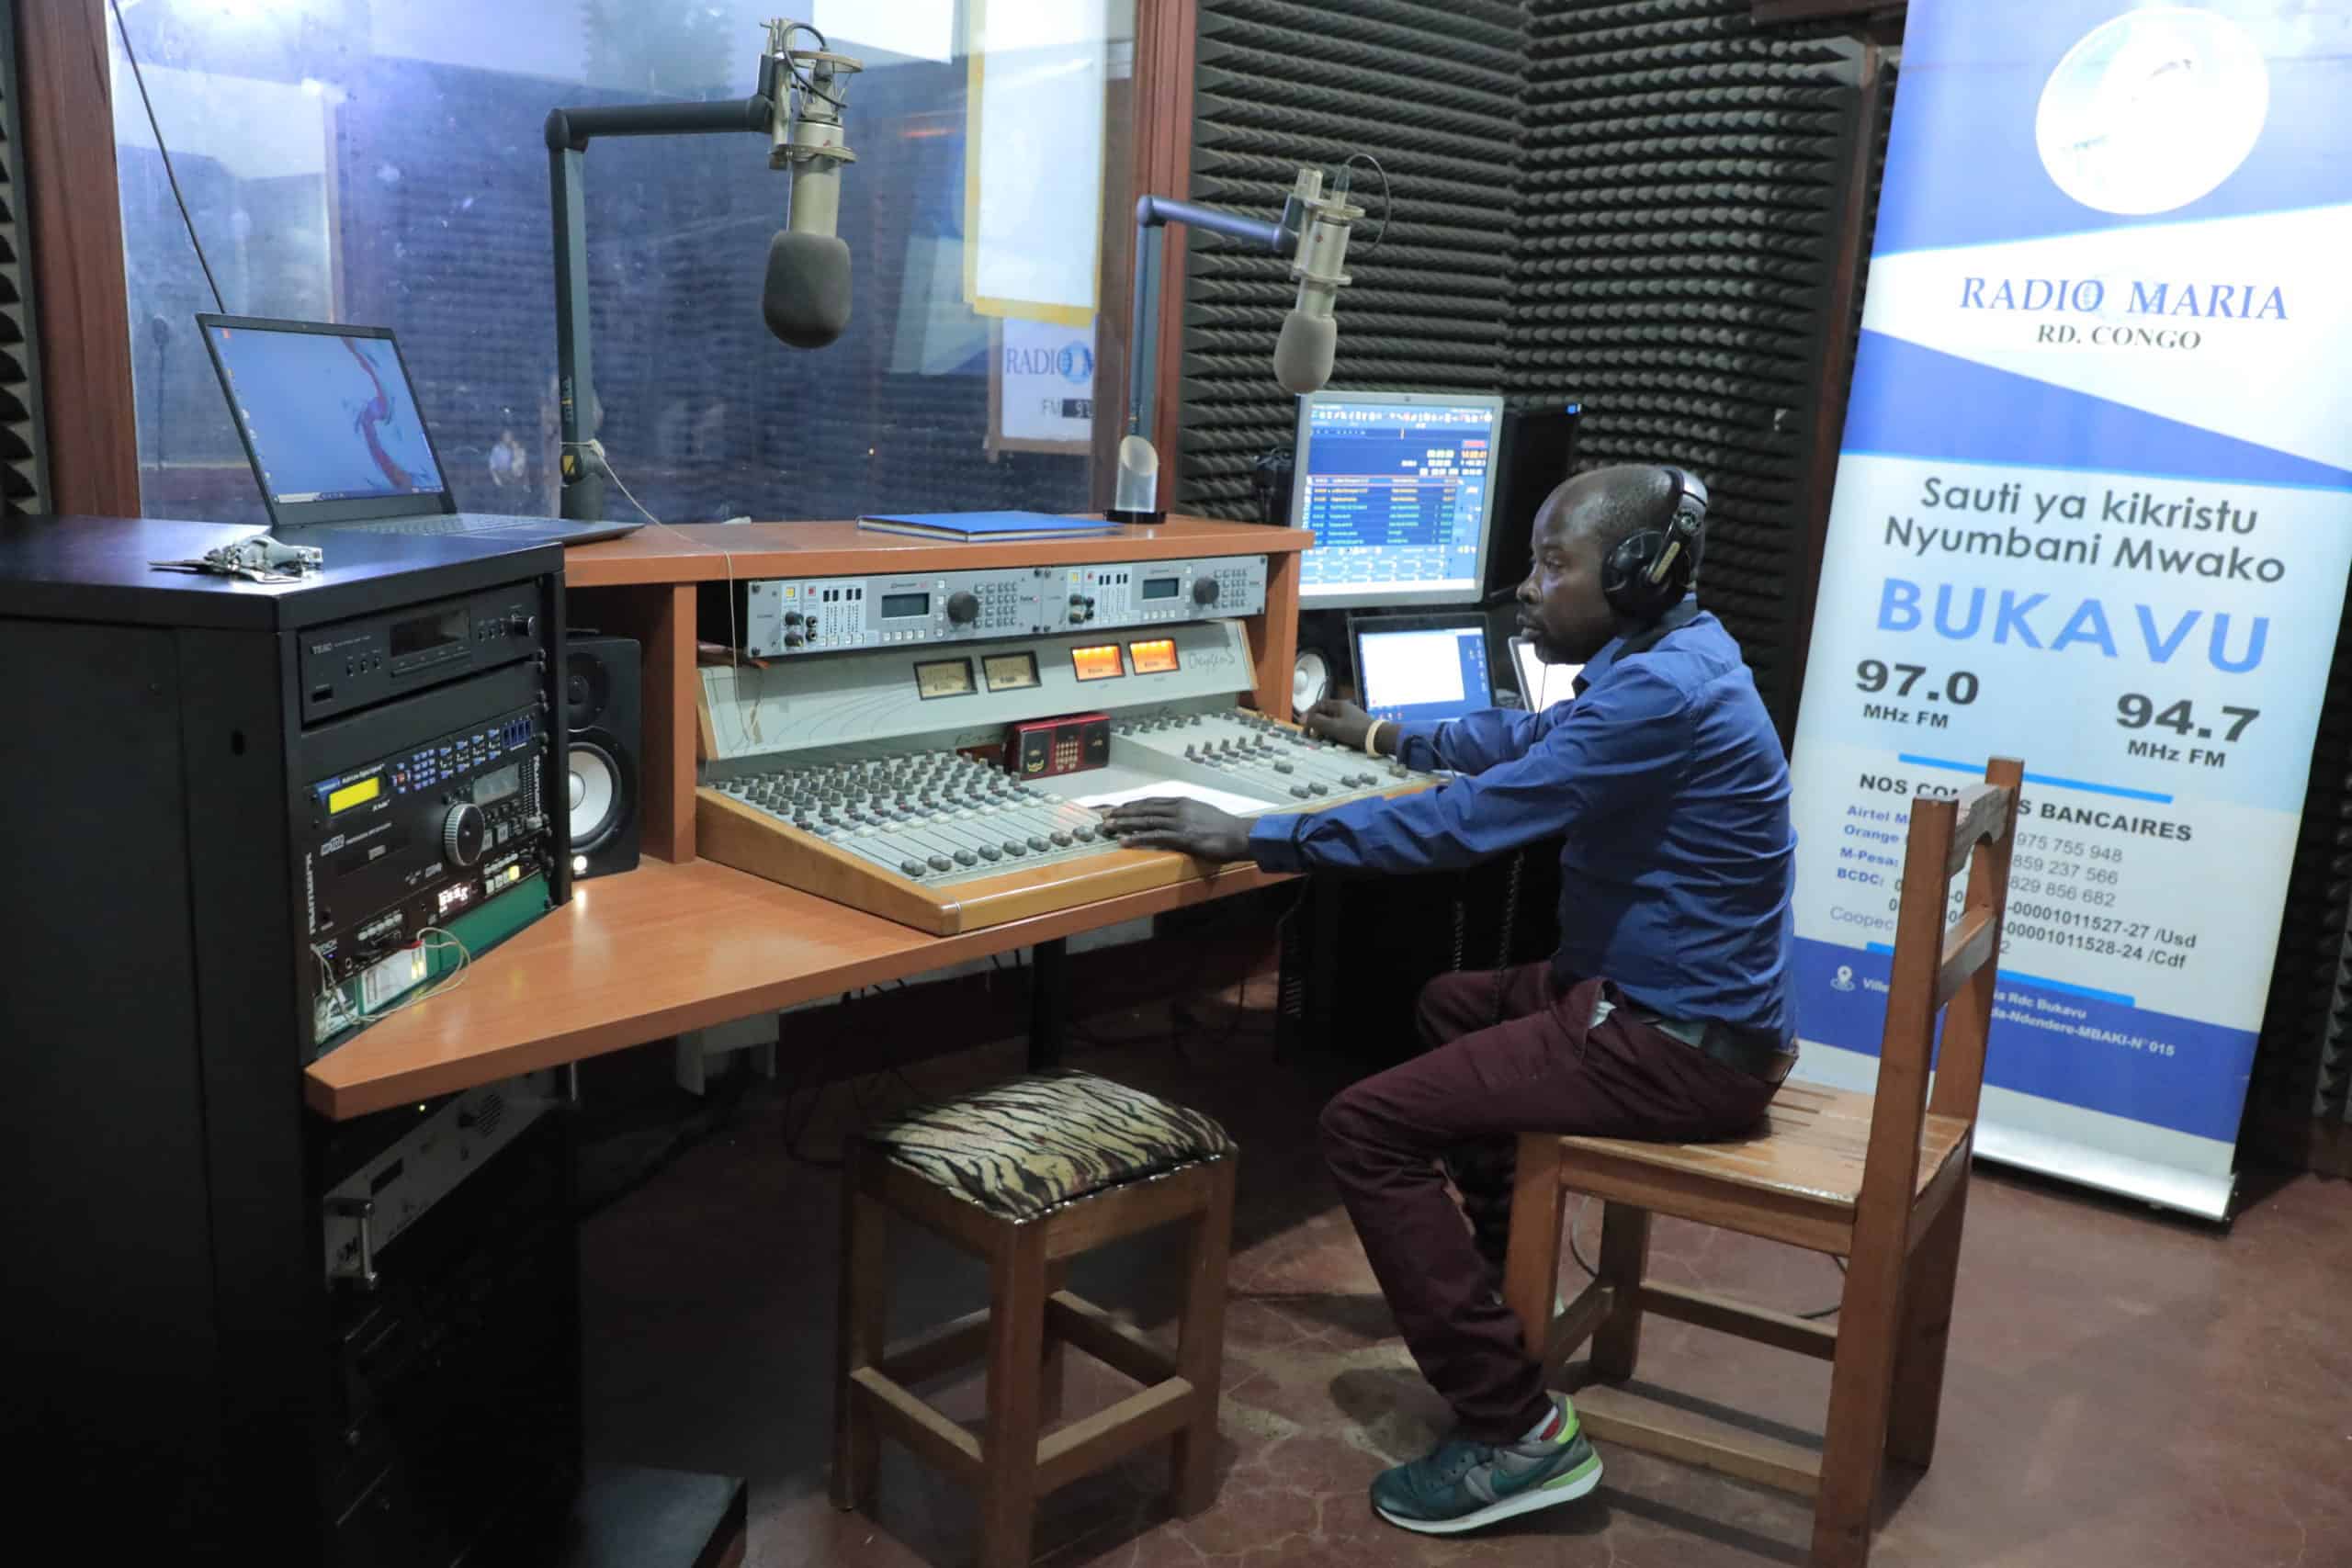 Equipment for a Catholic Radio Station in the Congo